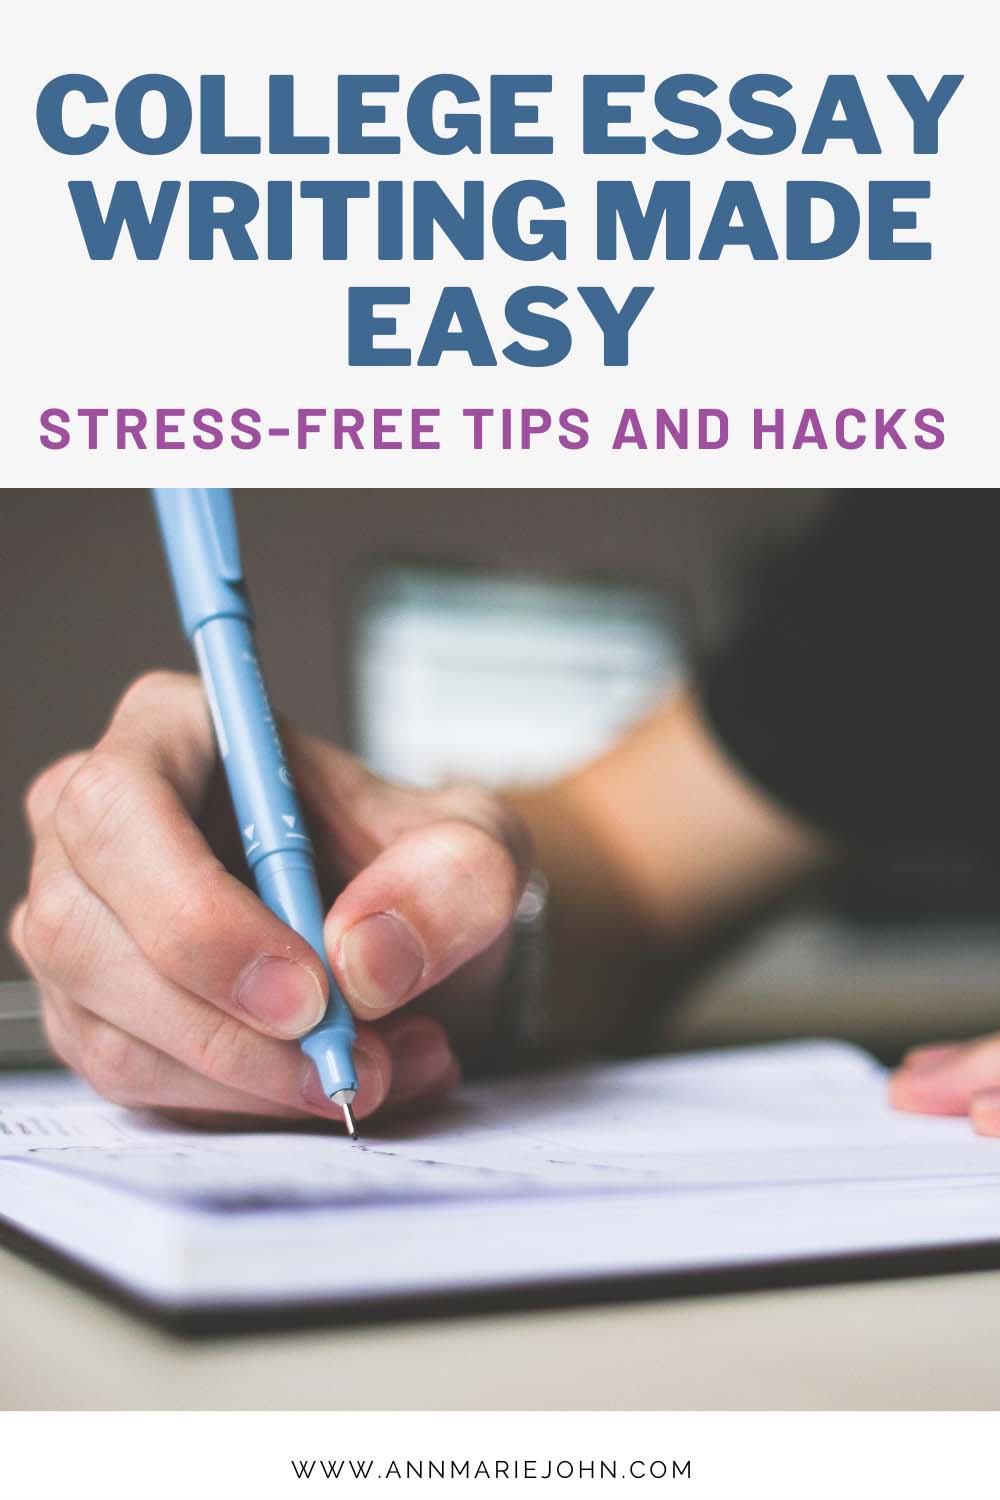 College Essay Writing Made Easy